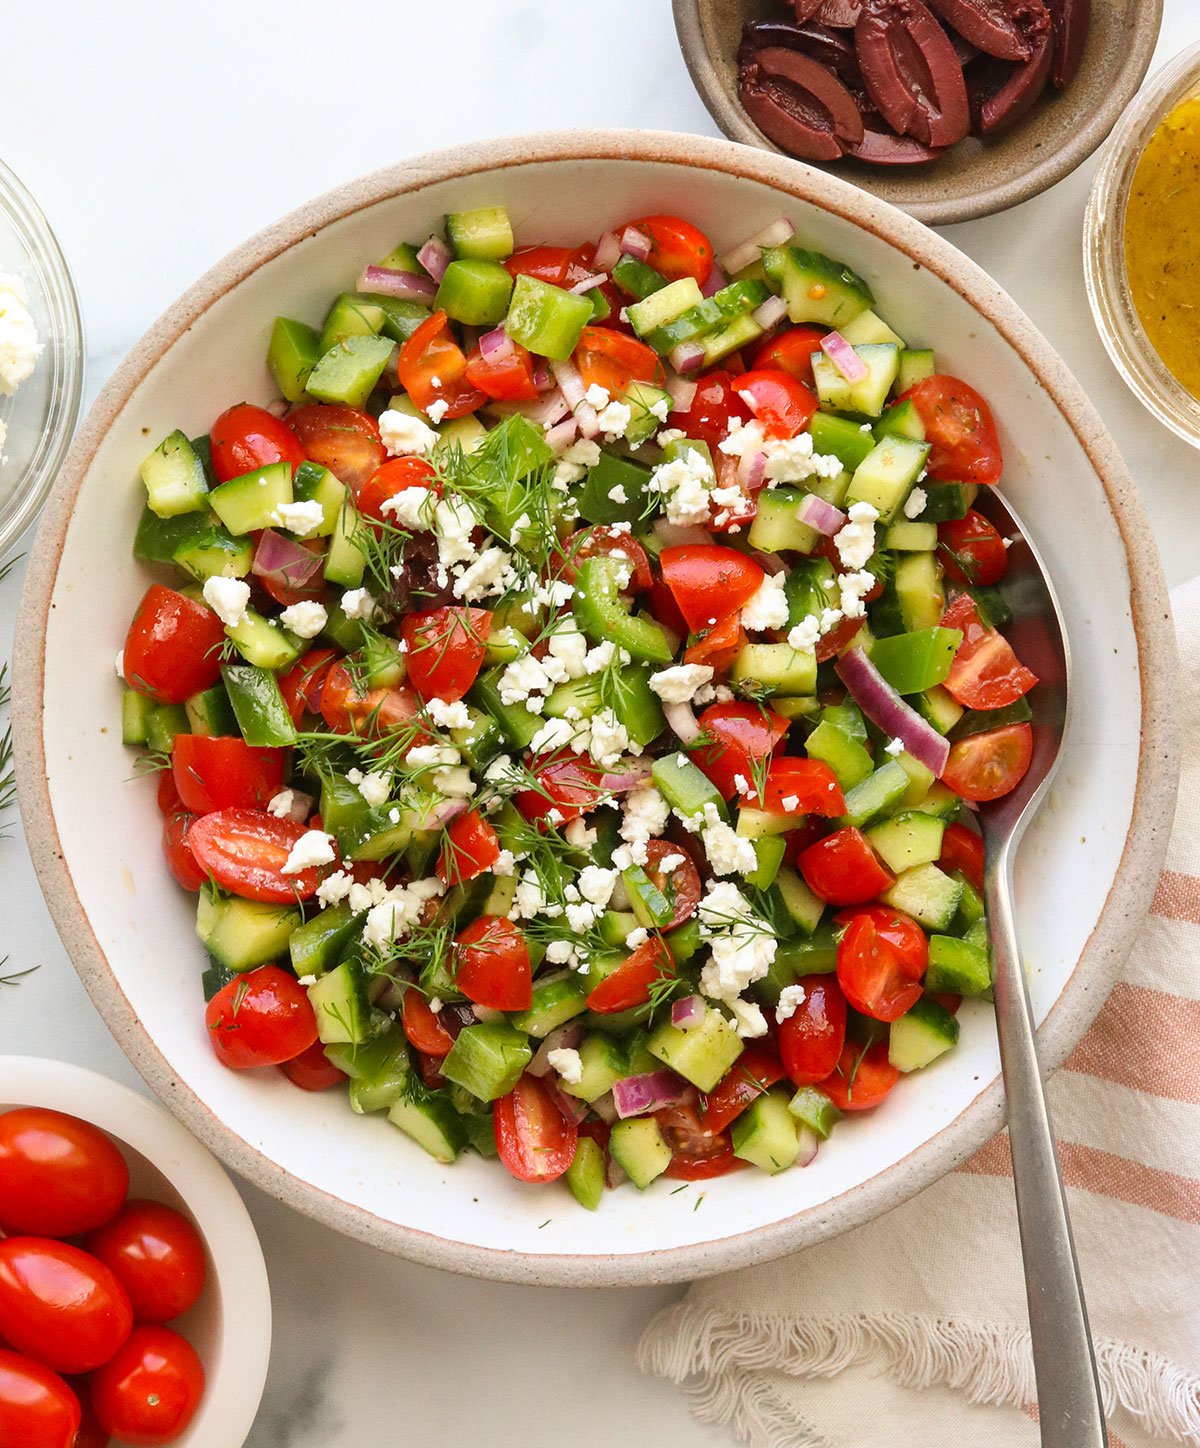 feta and fresh dill sprinkled on a Greek salad in a white bowl.